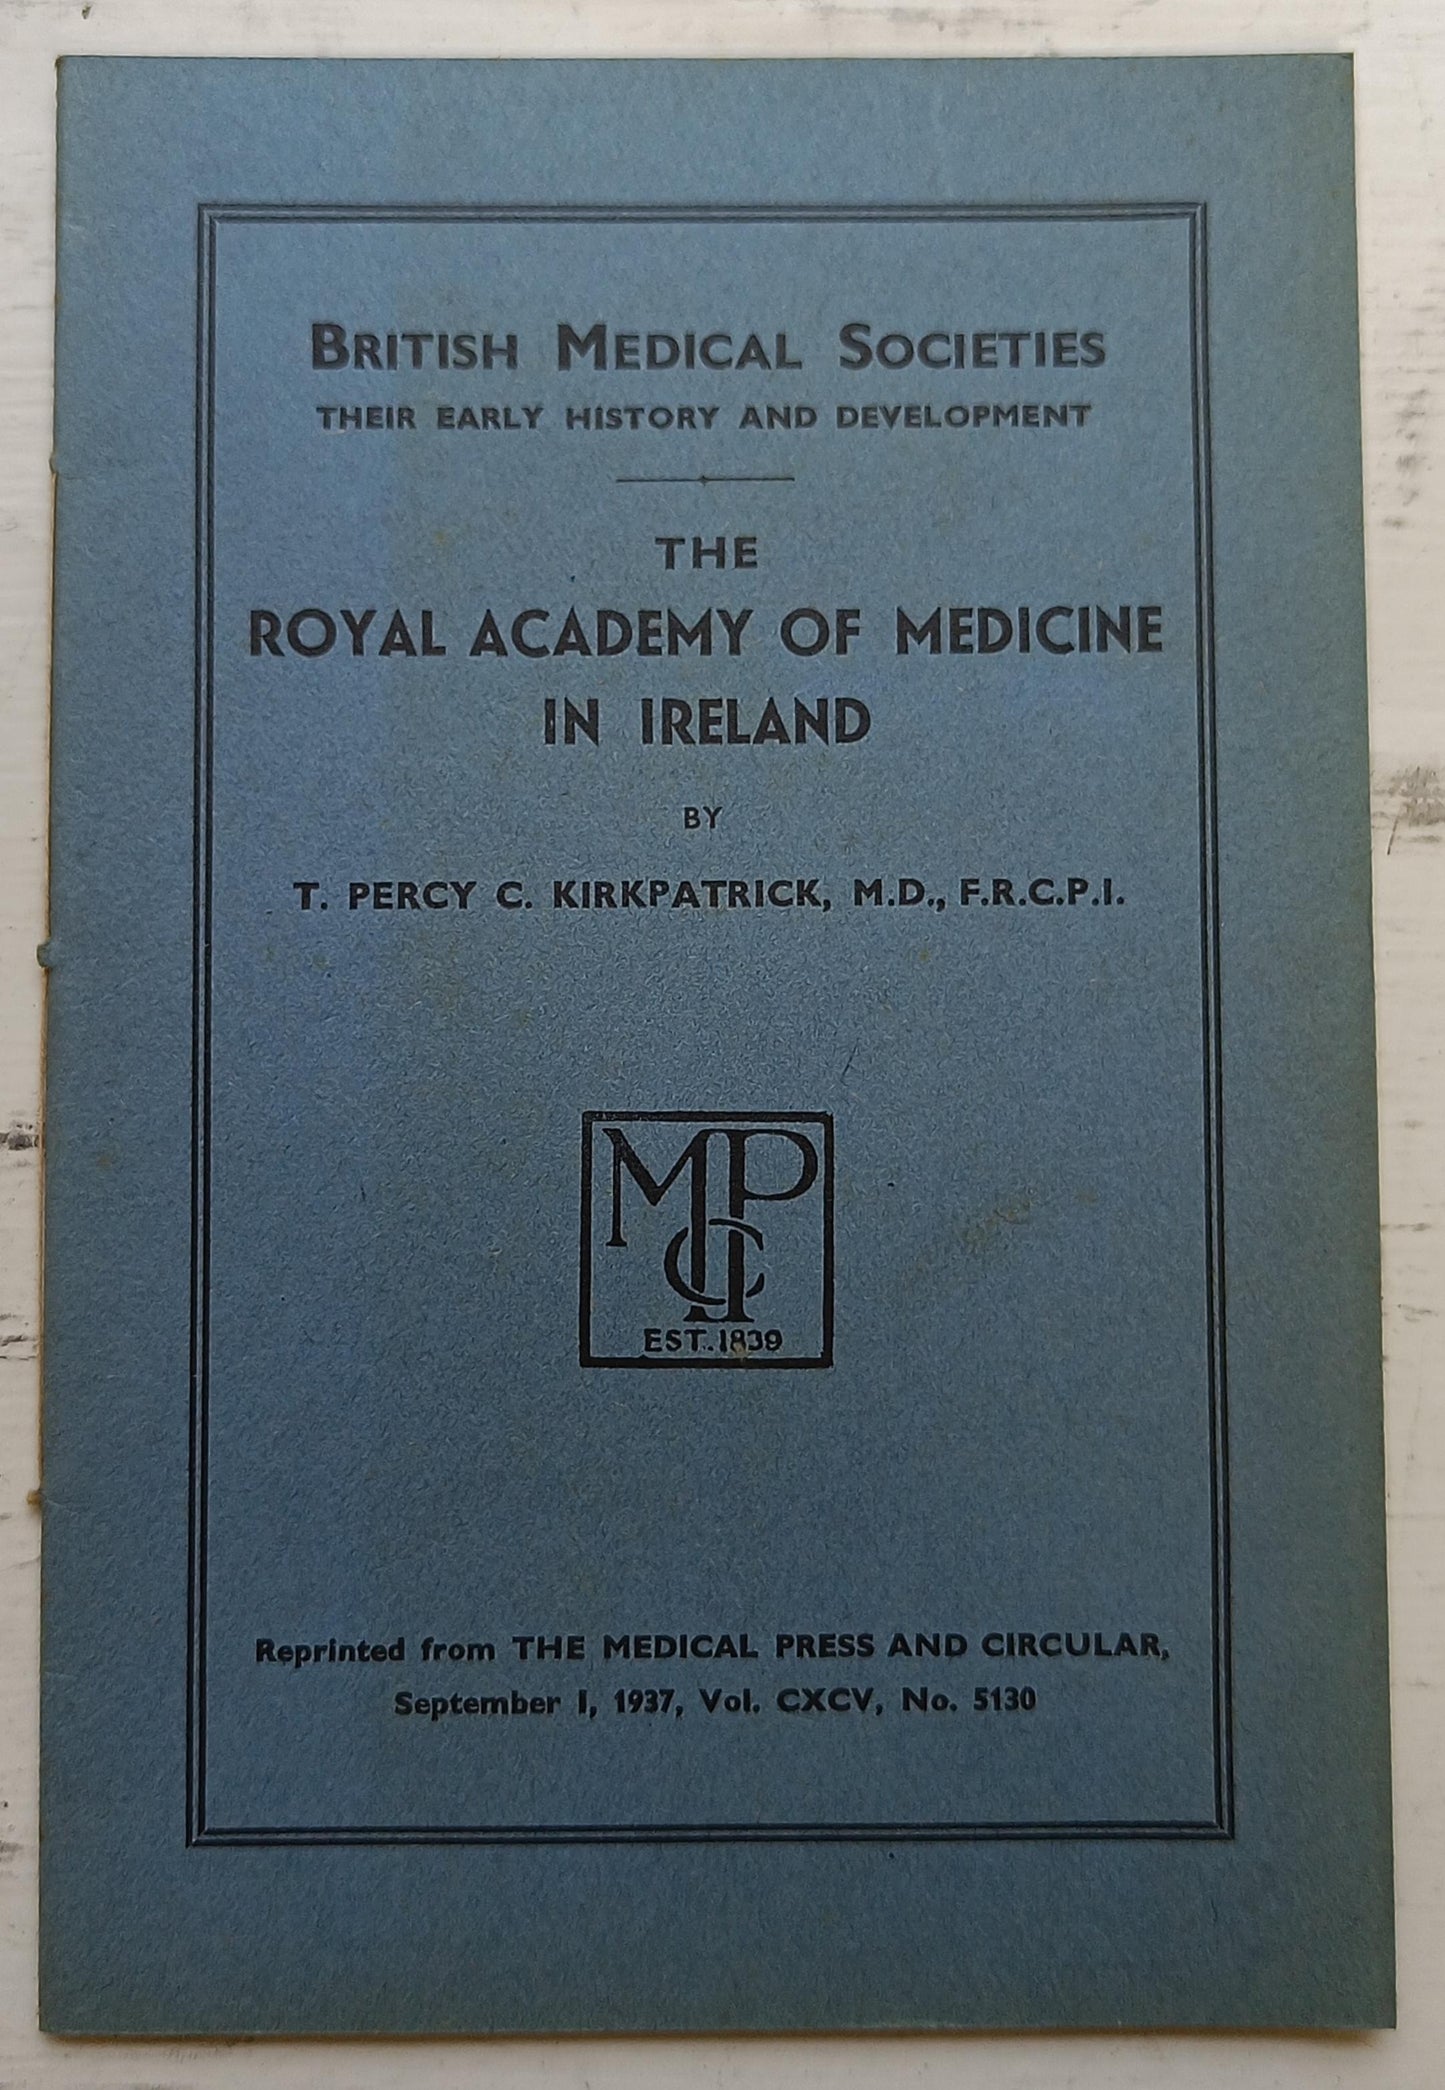 PAMPHLET BUNDLE: Texts relating to the Royal Academy of Medicine in Ireland